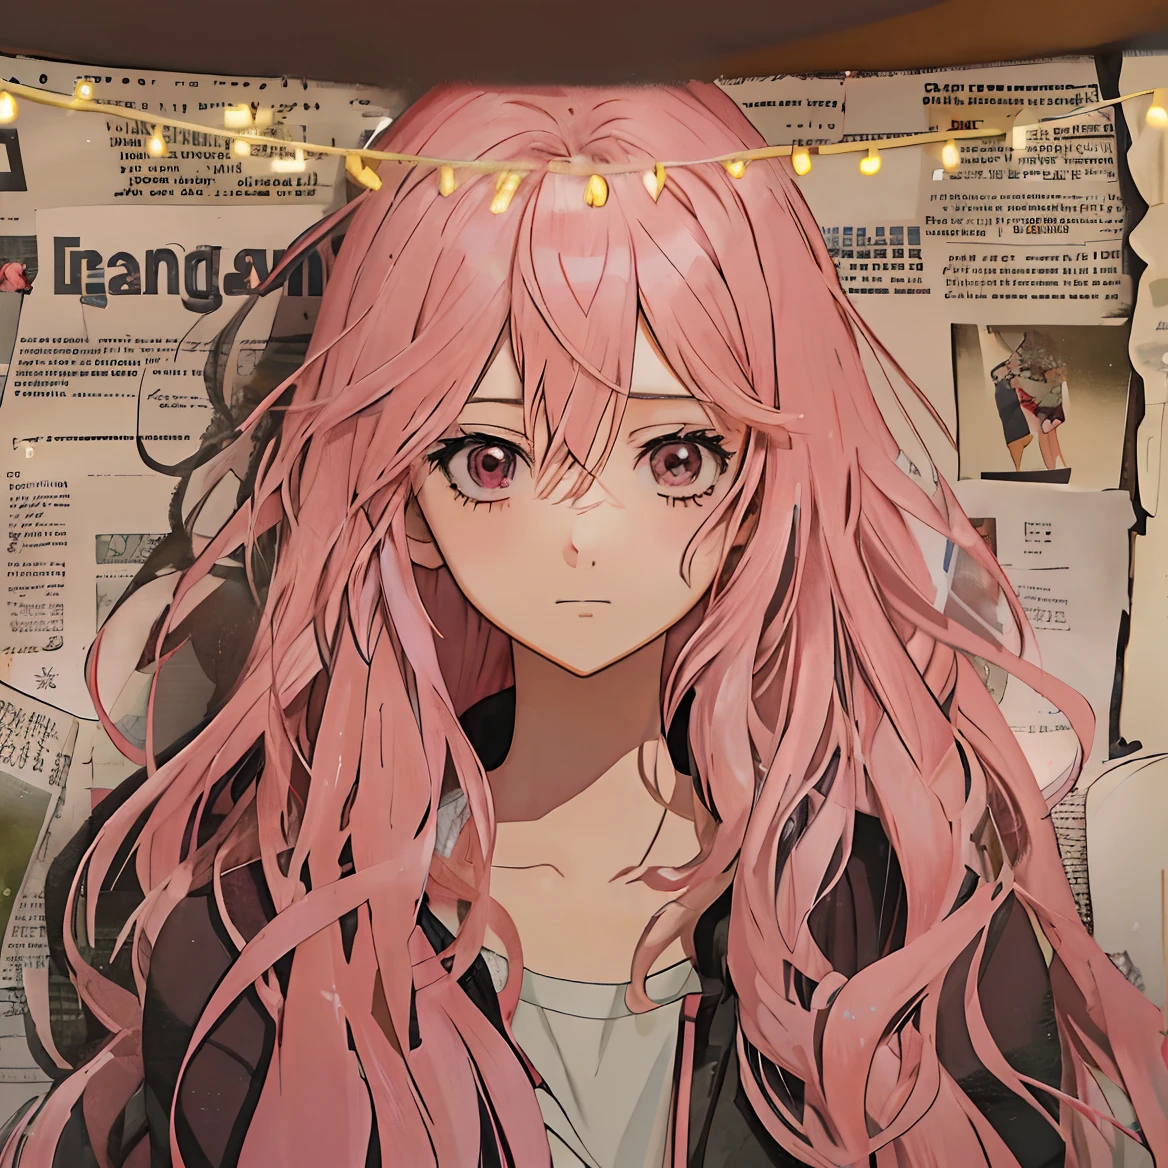 Anime girl has pink hair in front of the newspaper, anime visual of a young woman, anime visual of a cute girl, sakura haruno, mirai nikki, Best anime 4k konachan wallpaper, screenshot from the anime film, Today's featured anime stills, close up of a young anime girl